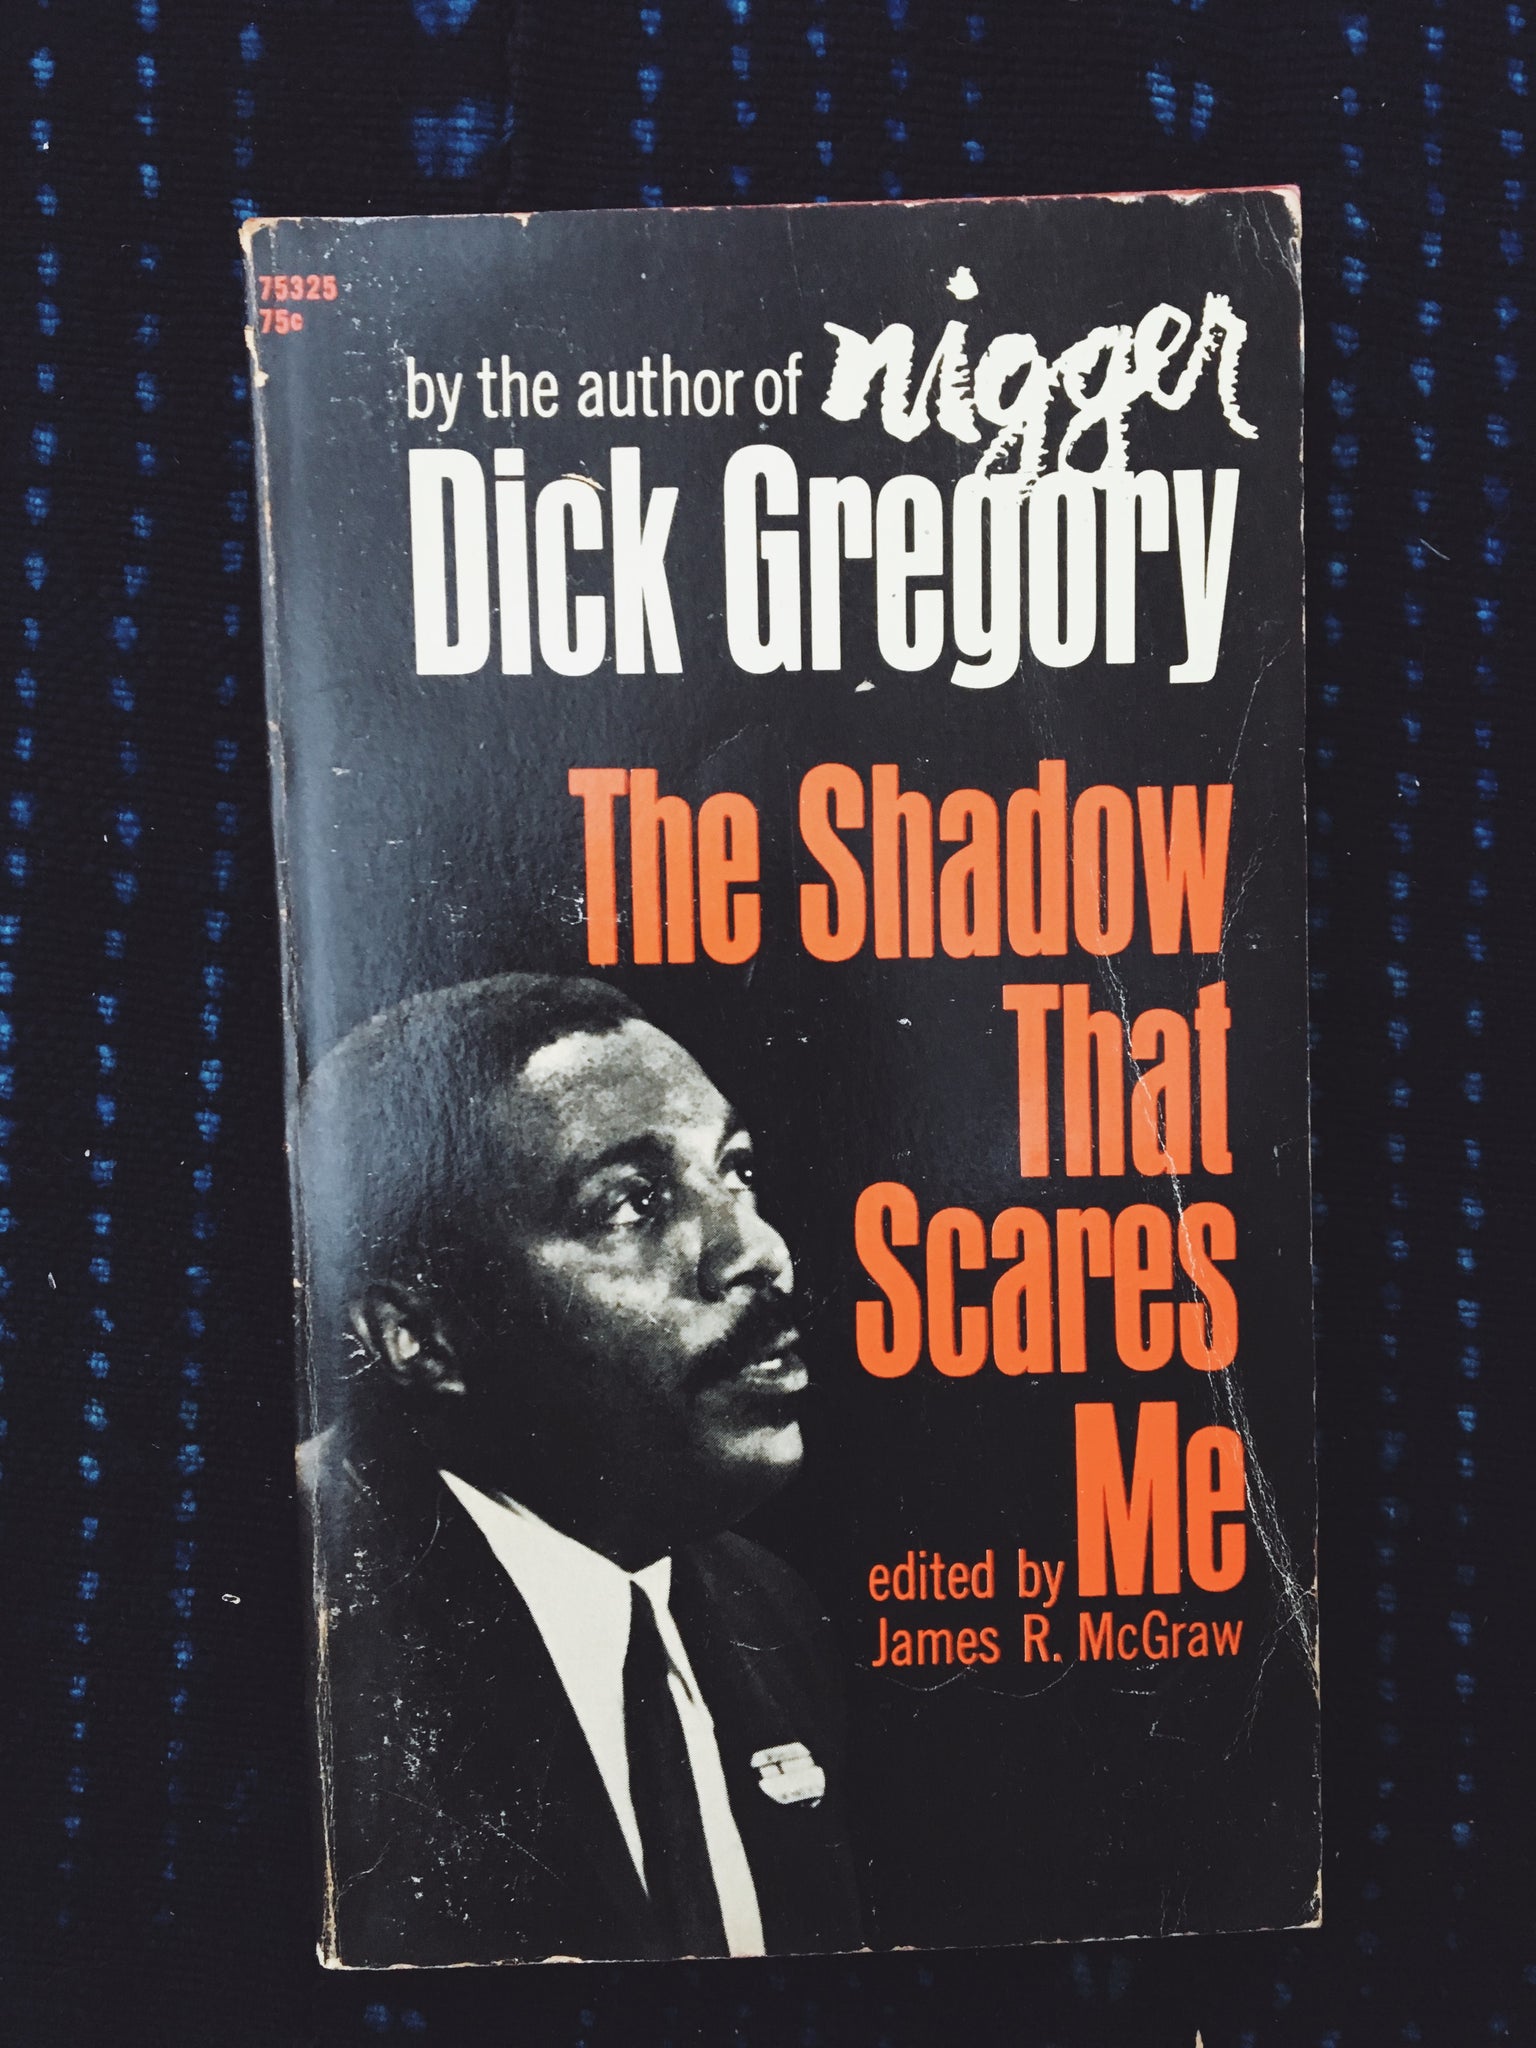 Vintage paperback copy of "The Shadow That Scares Me" by Dick Gregory (1968)